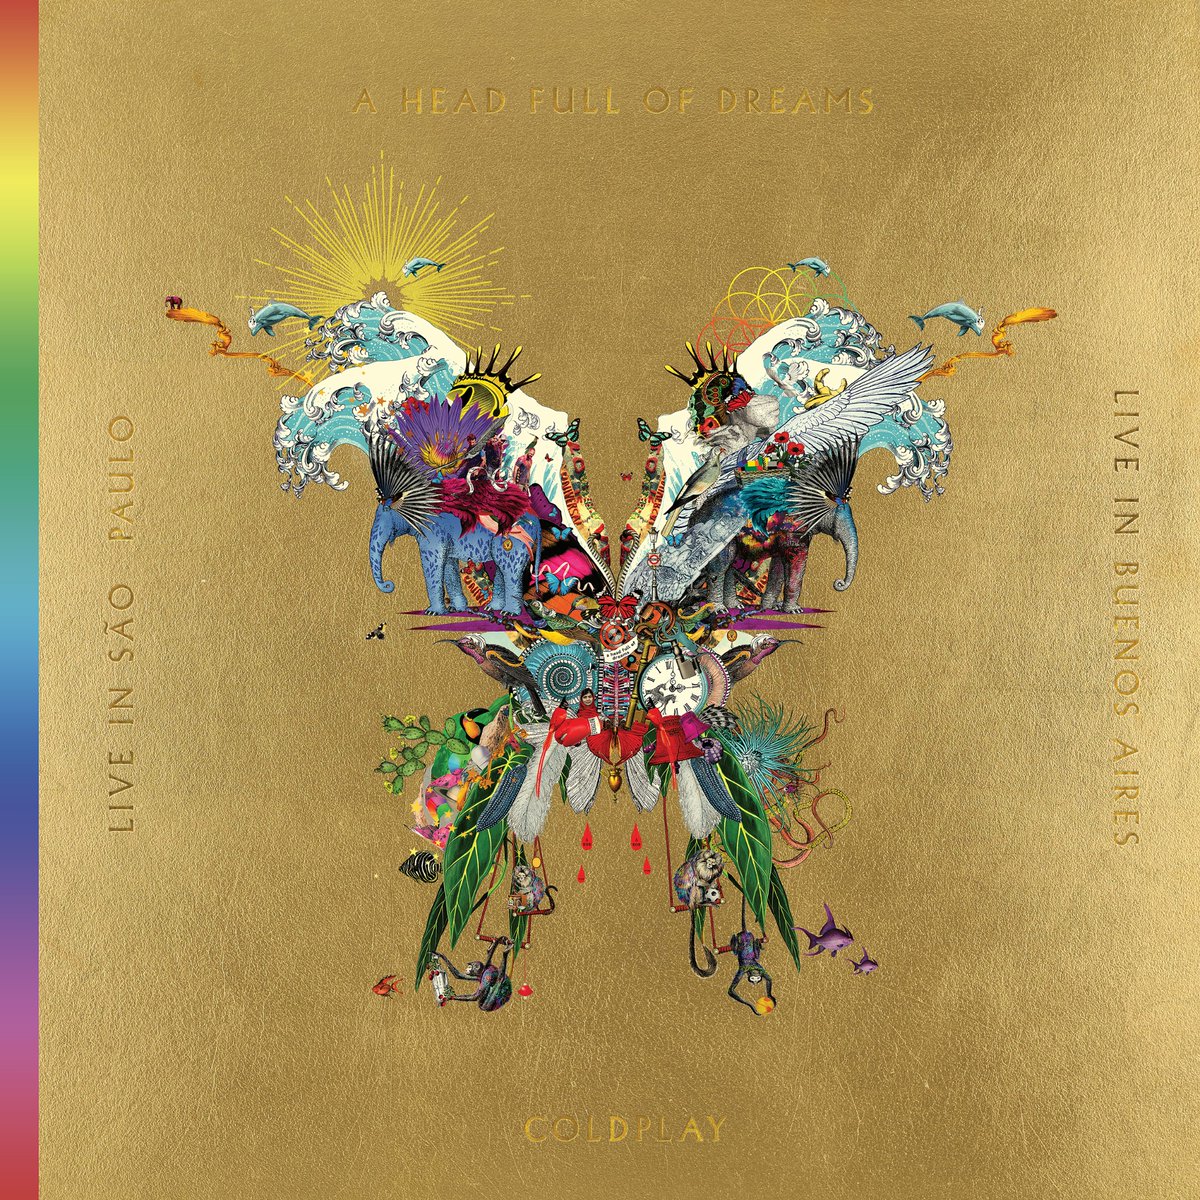 Coldplay: Live In Buenos Aires Vinyl / Live In Sao Paulo DVD / A